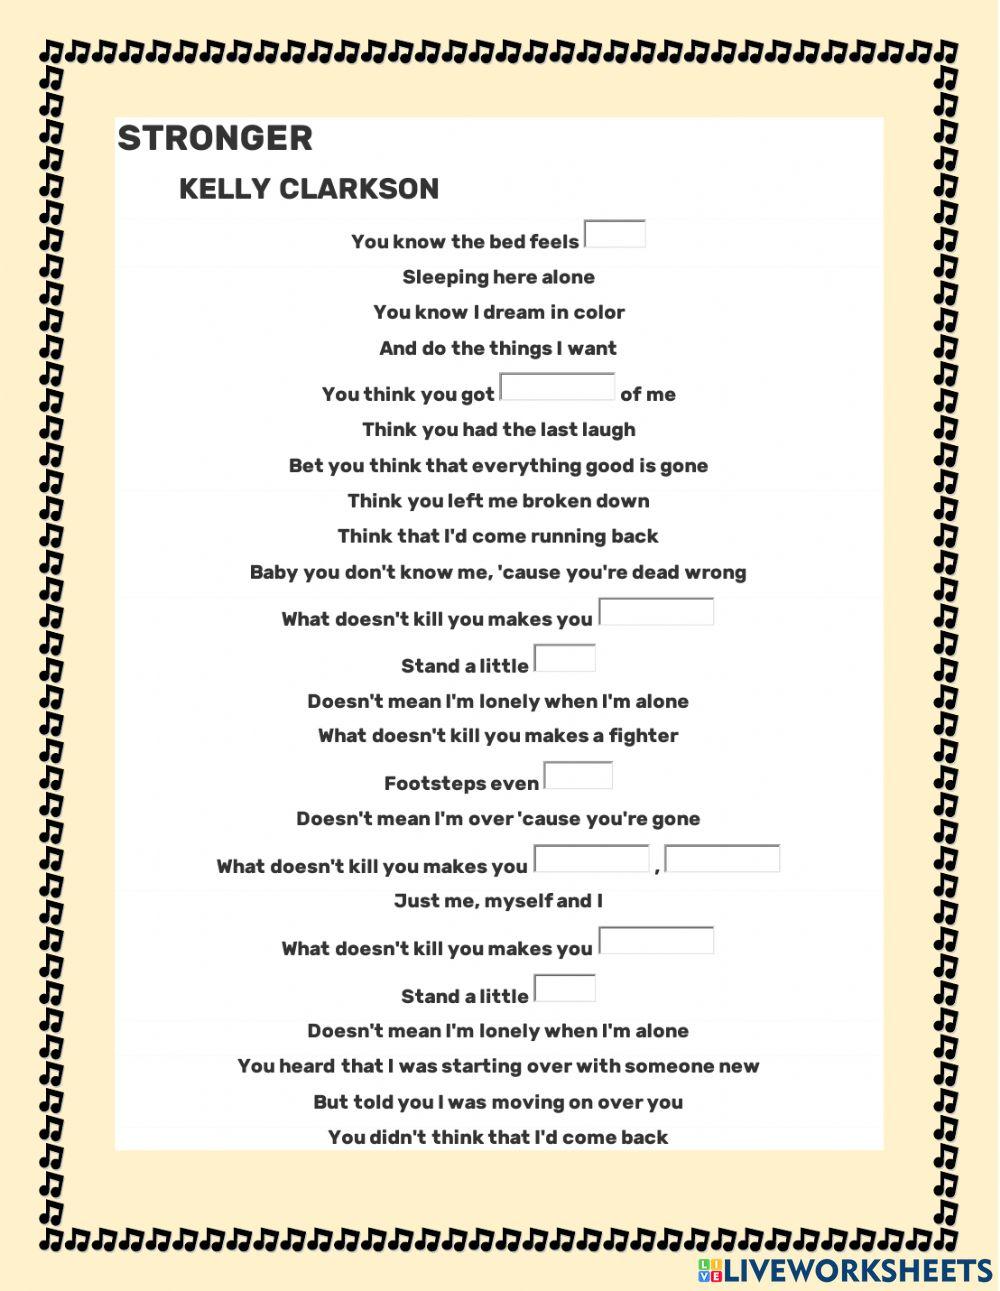 Degrees of comparison adjectives - Stronger, Kelly Clarkson